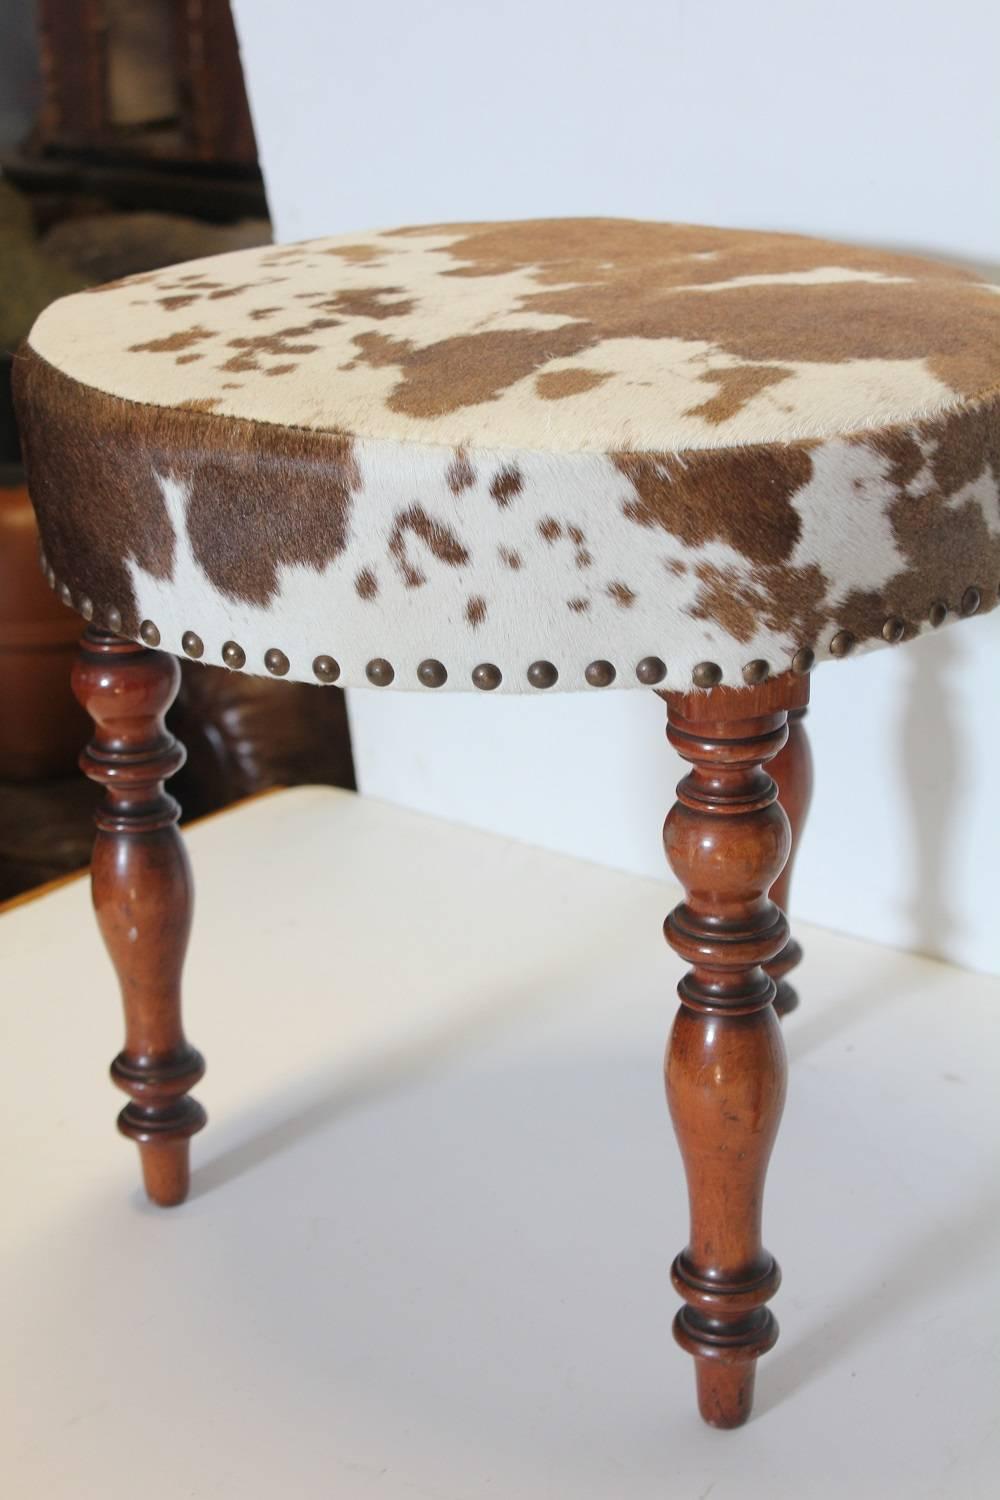 Antique English cowhide and wood stools. New cowhide upholstery.